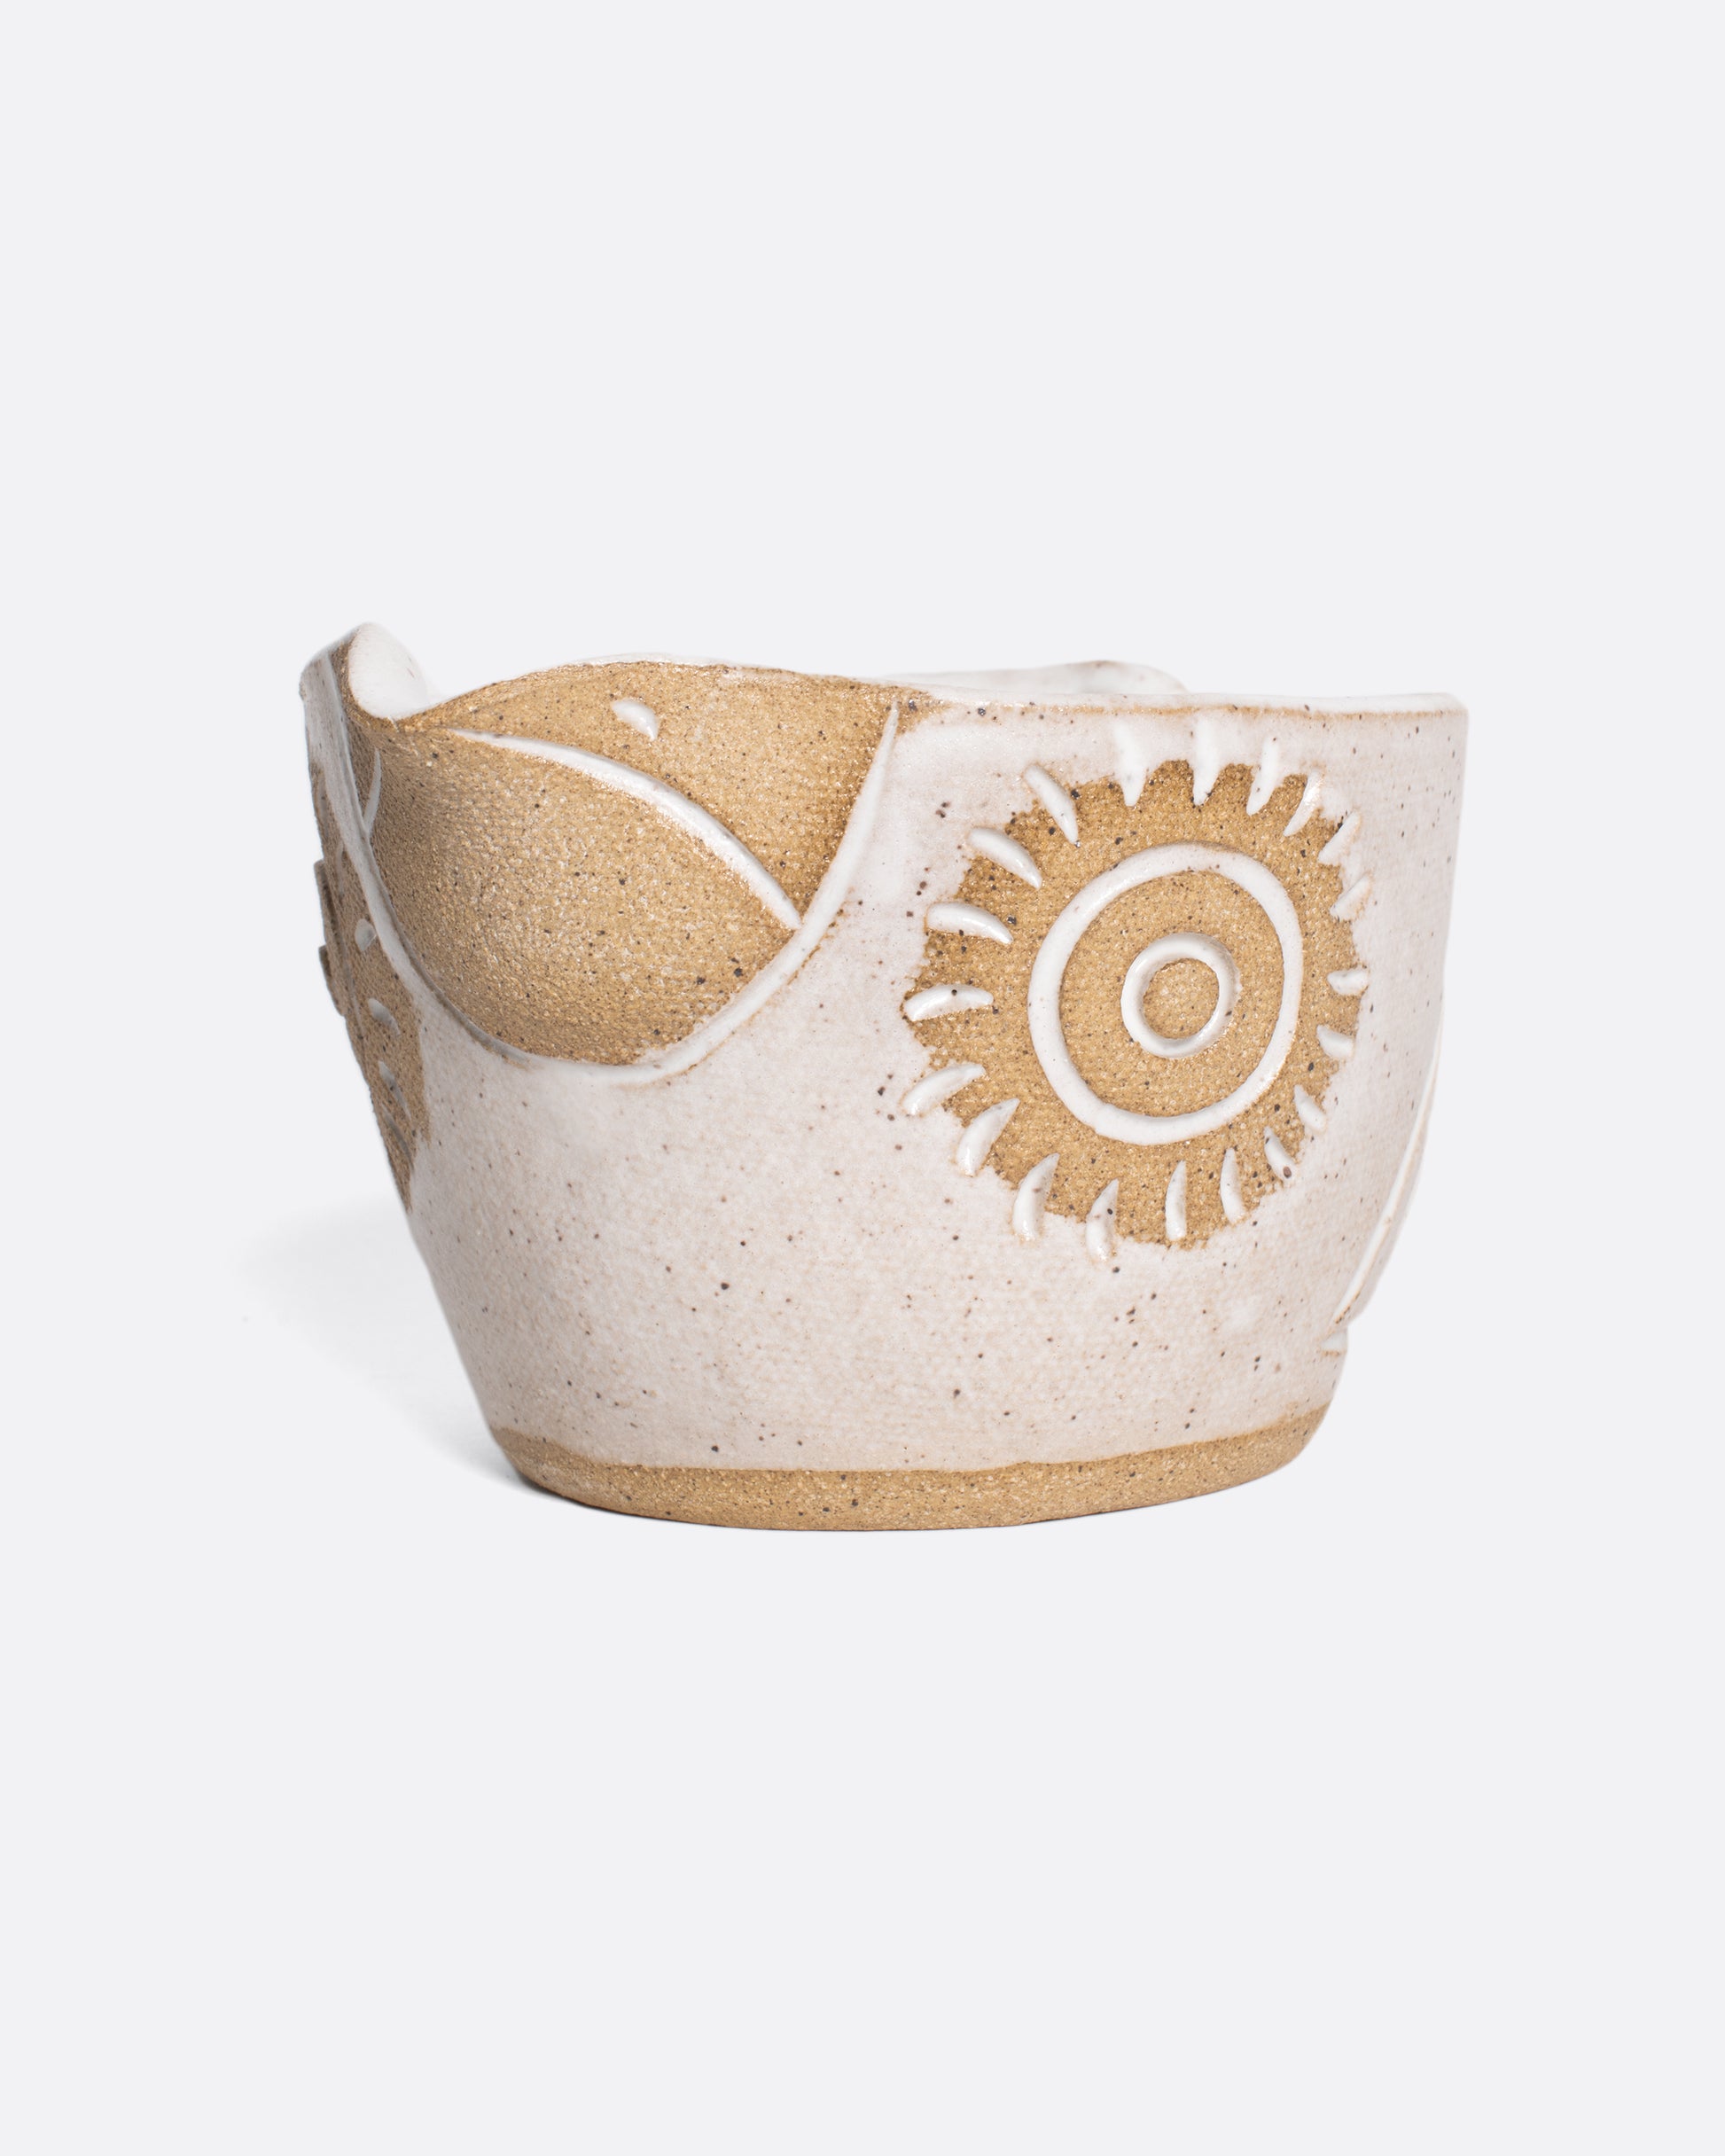 A handmade ceramic bird bowl whose beak serves as a spout, perfect for mixing and serving your favorite salad dressing.